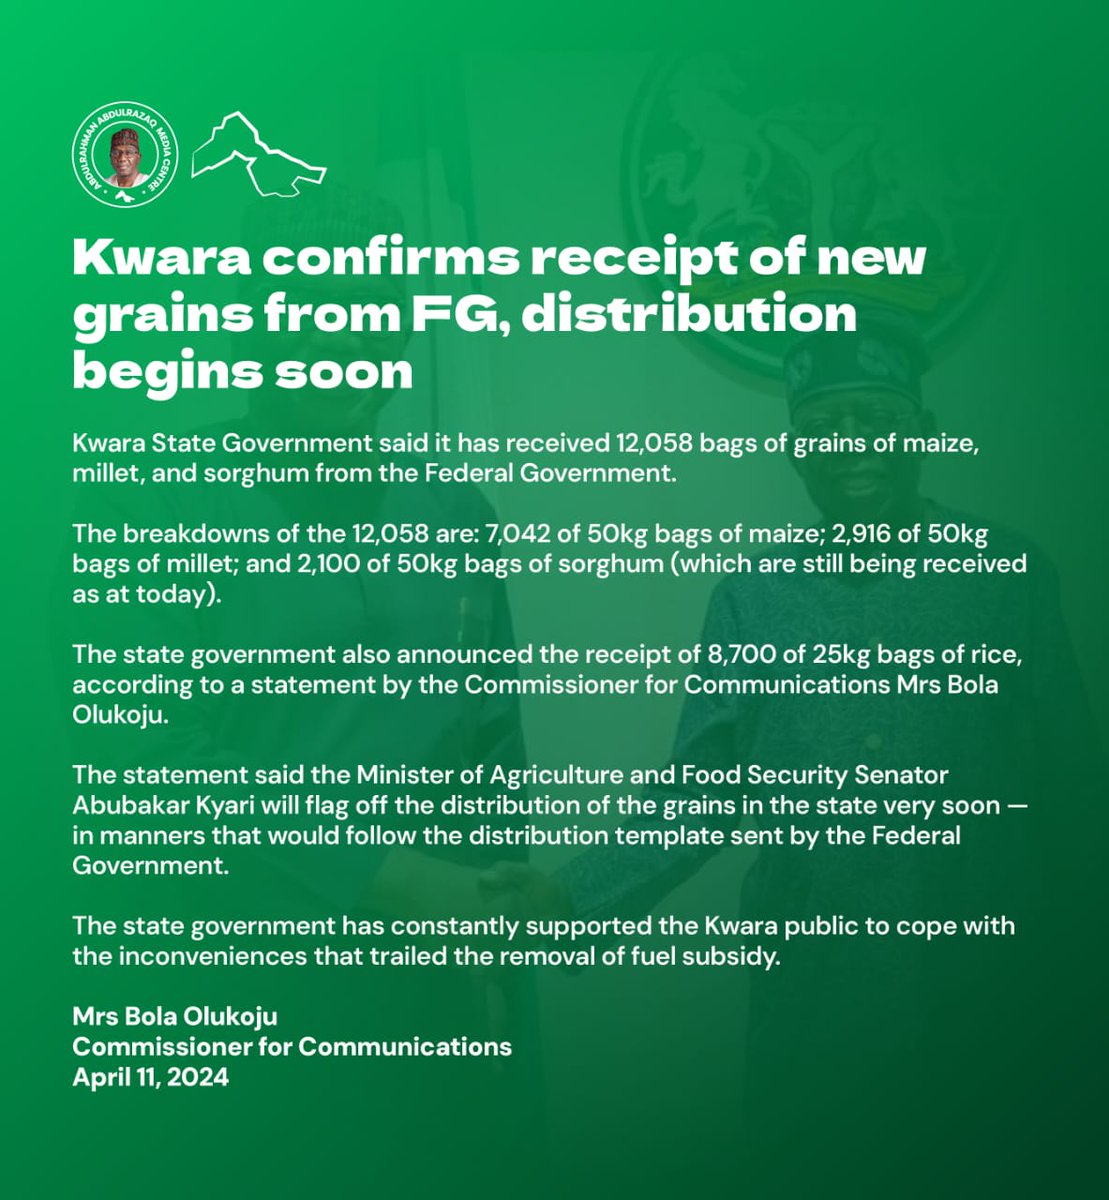 KWSG UPDATE: Kwara confirms receipt of new grains from FG, distribution begins soon